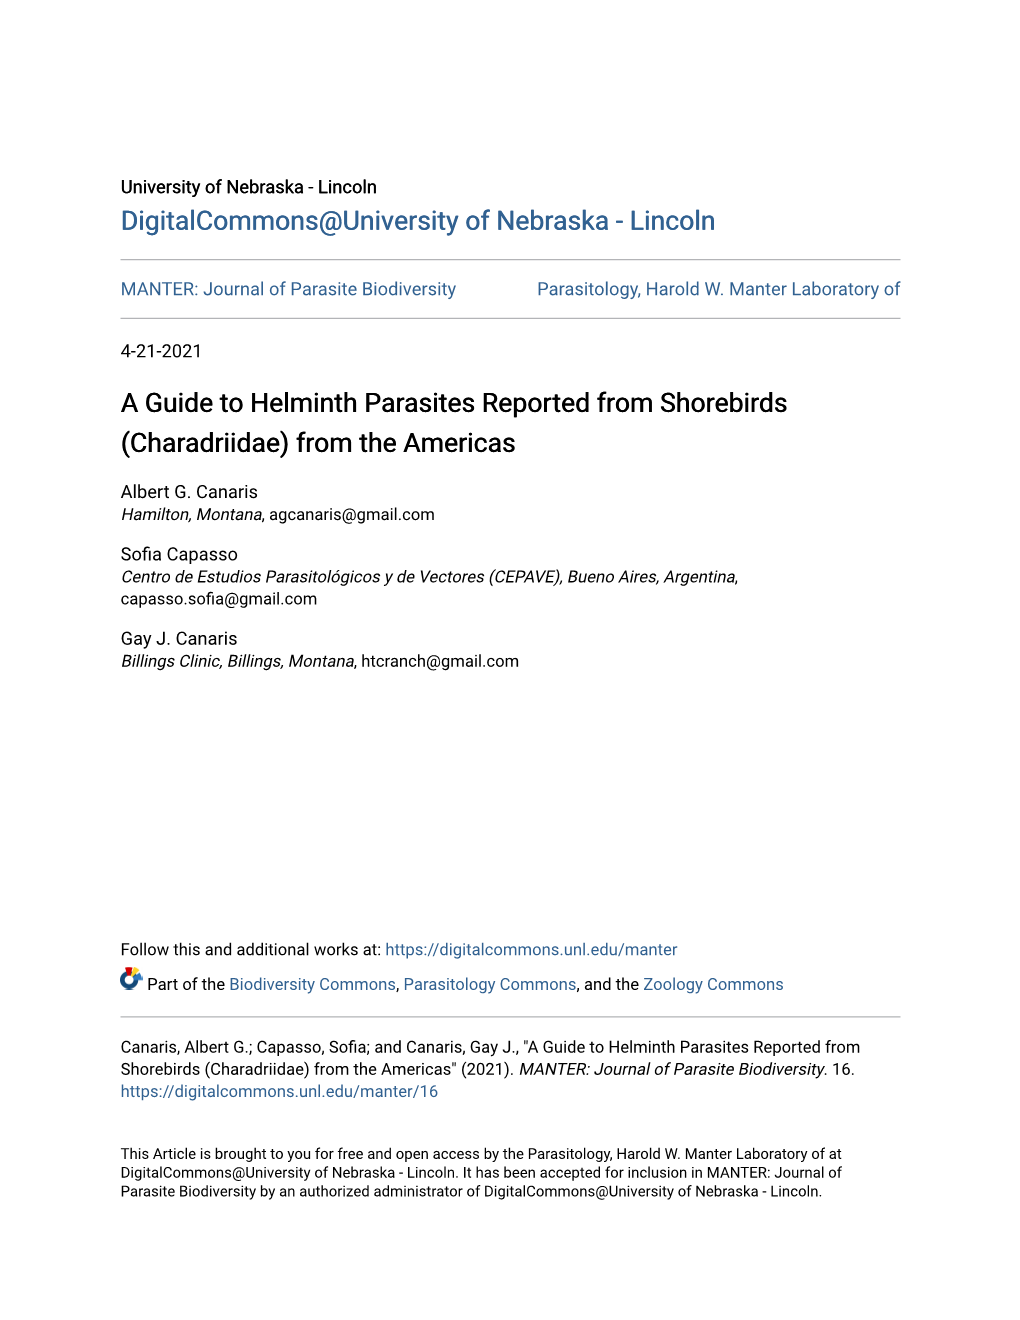 A Guide to Helminth Parasites Reported from Shorebirds (Charadriidae) from the Americas